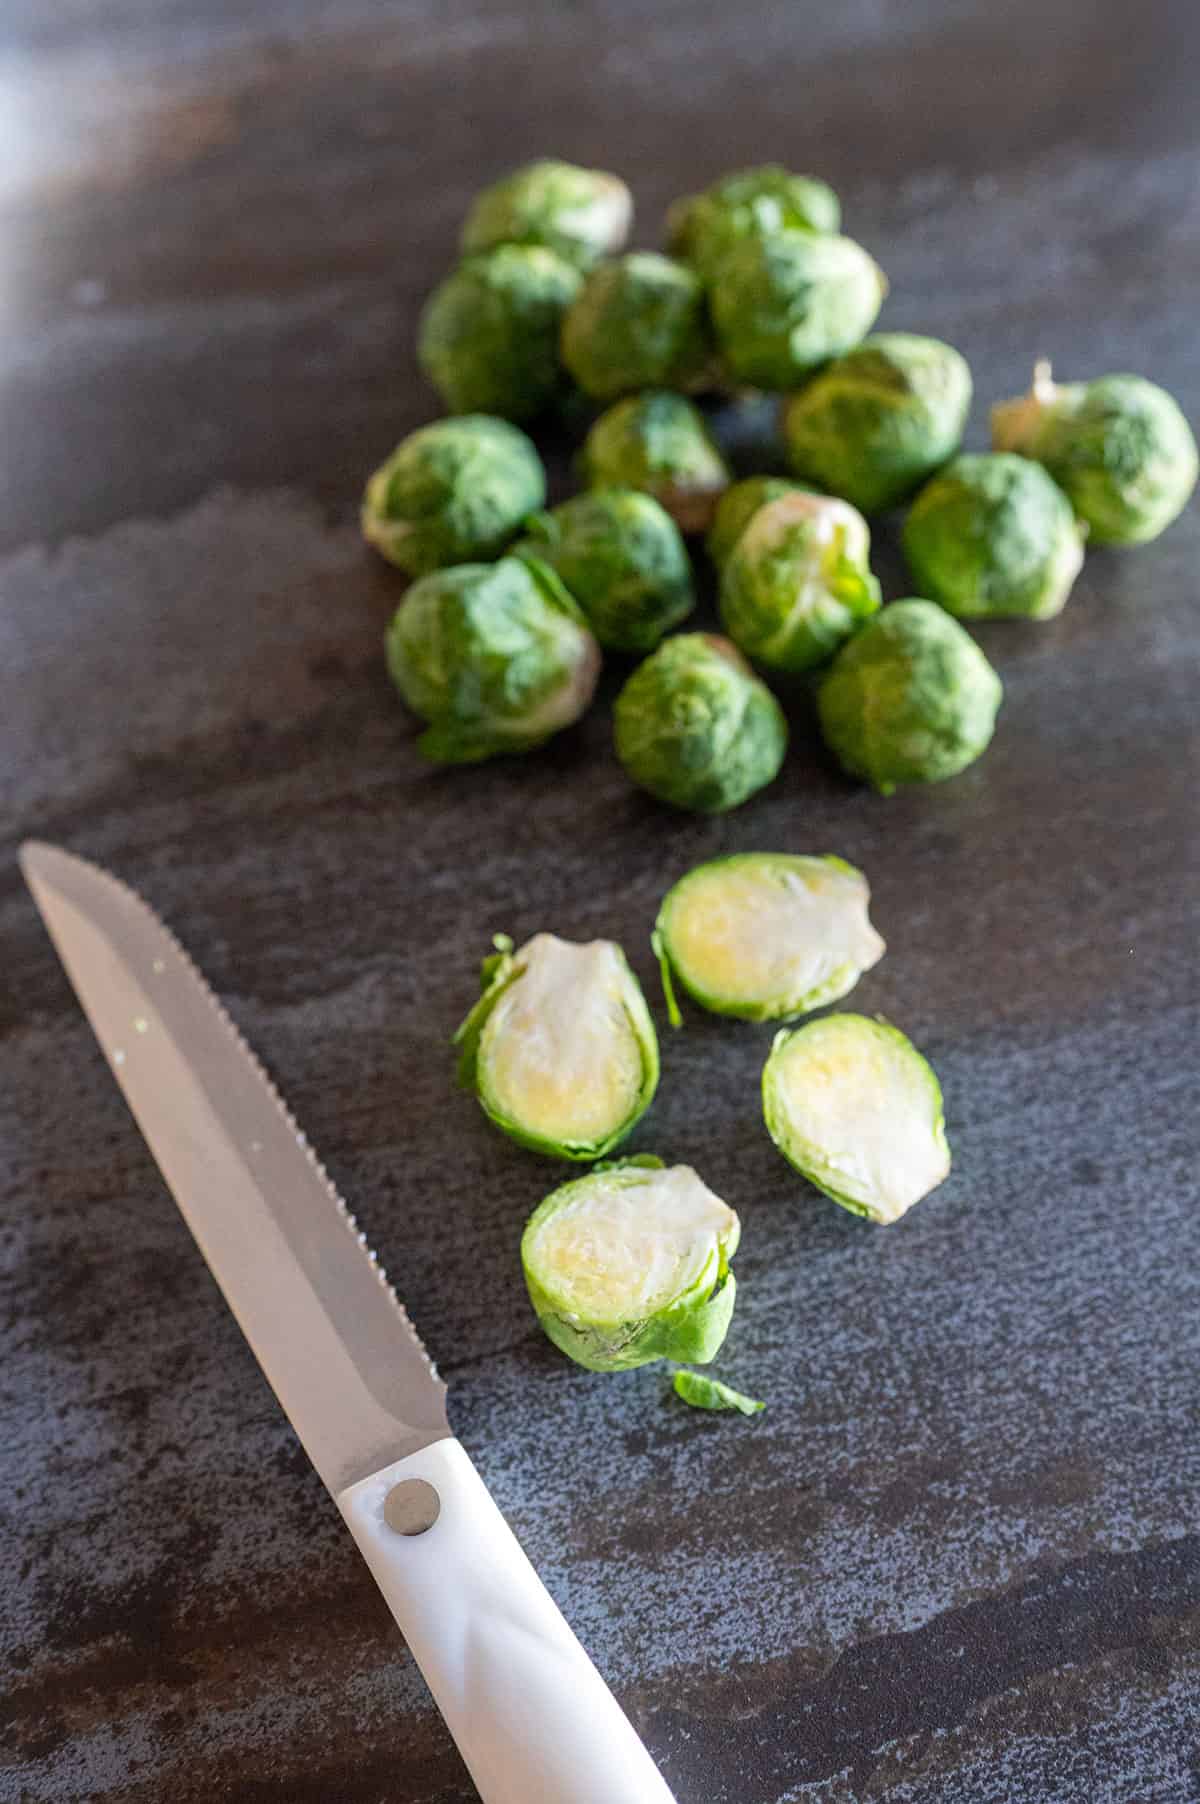 brussels sprouts sliced in half.